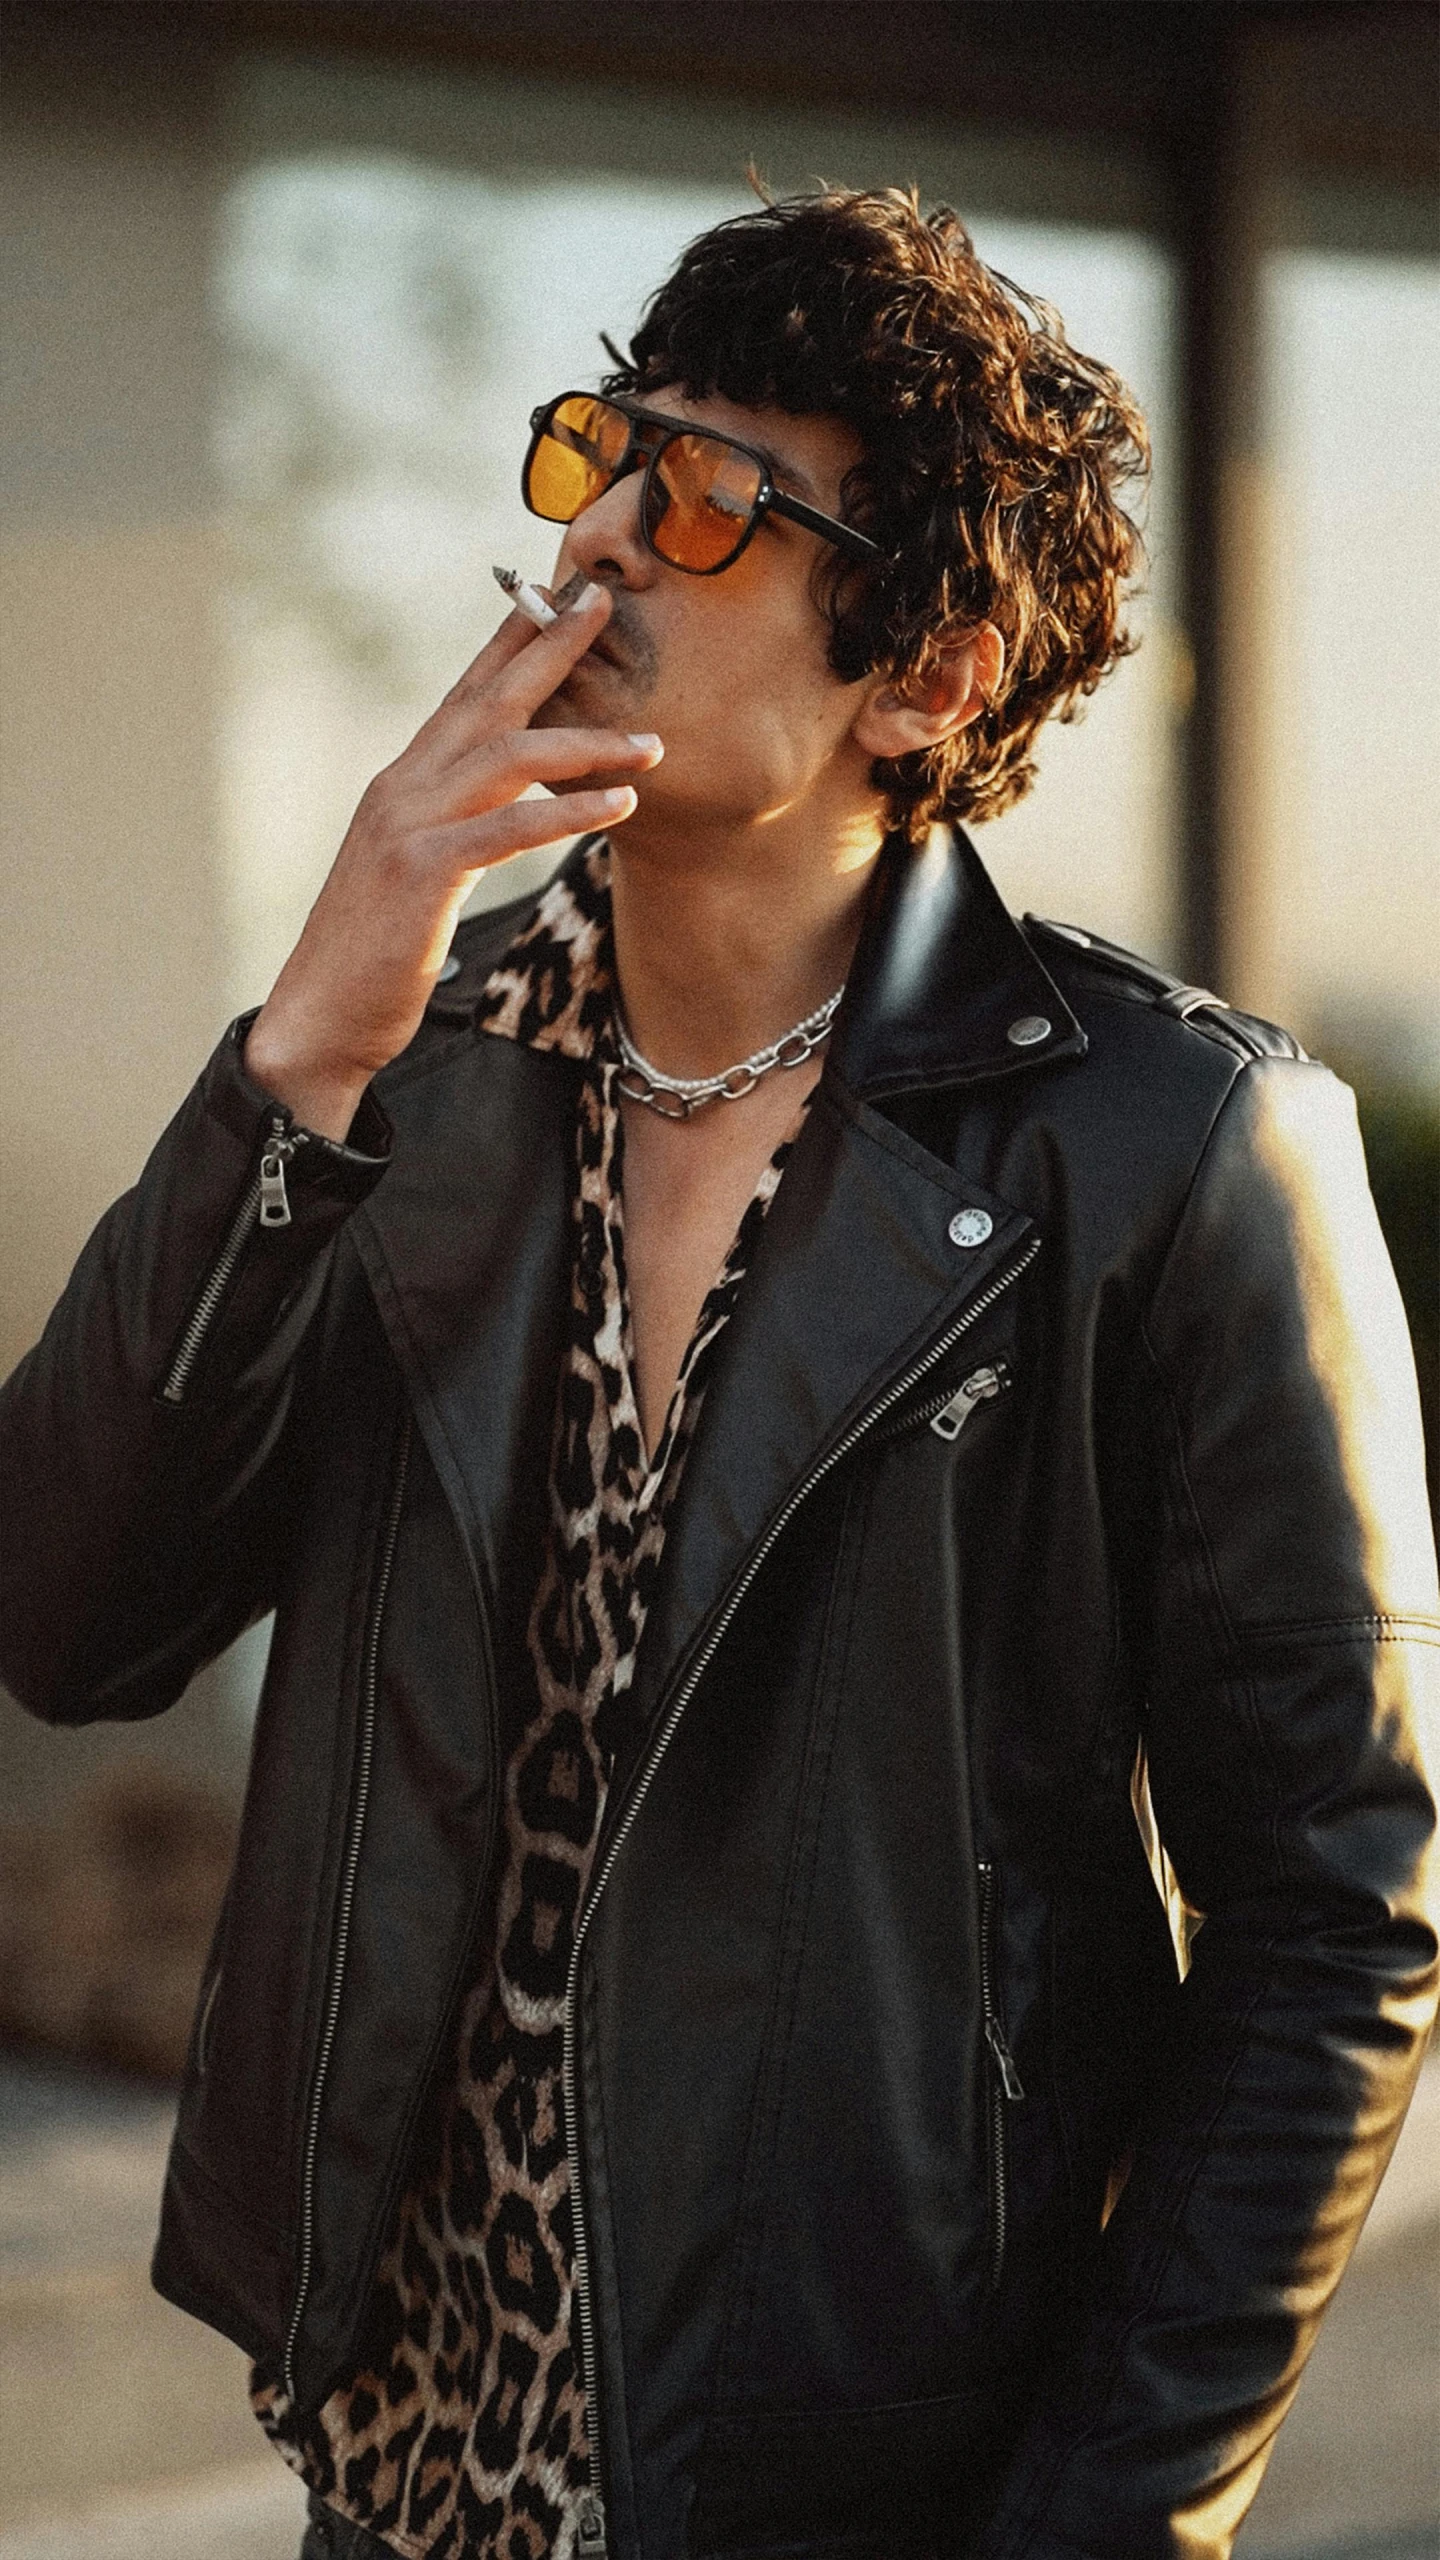 a person standing wearing a jacket, sunglasses and smoking a cigarette